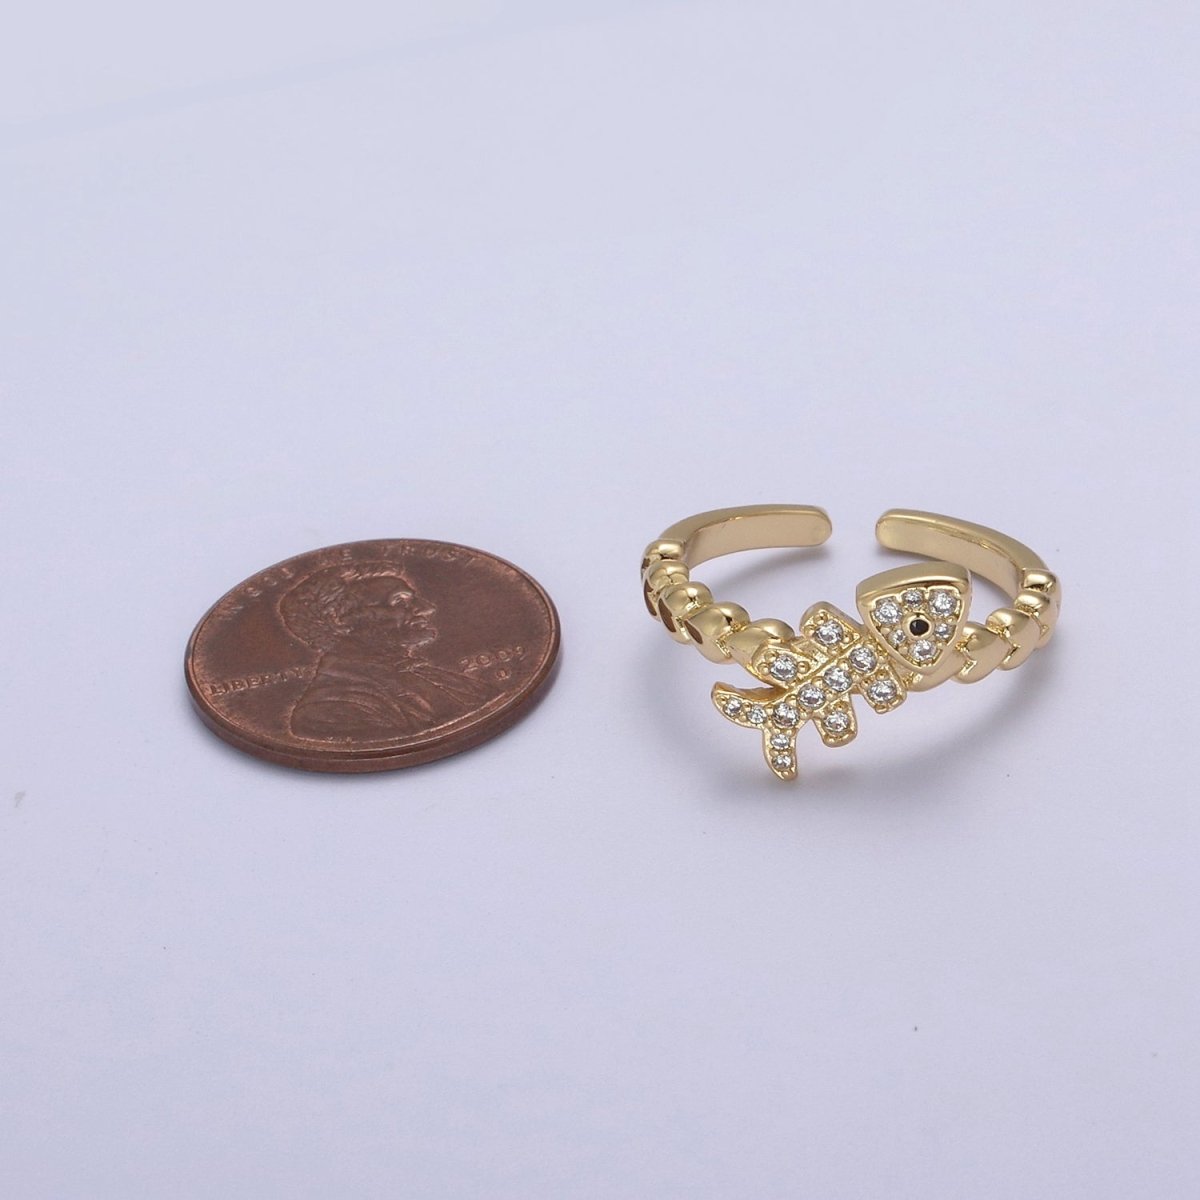 Micro Pave Fish Bone Ring, Heart Textured Gold Adjustable Band Ring, 24K Gold Filled Nature Ocean Wildlife Under The Sea Ring U-438 - DLUXCA